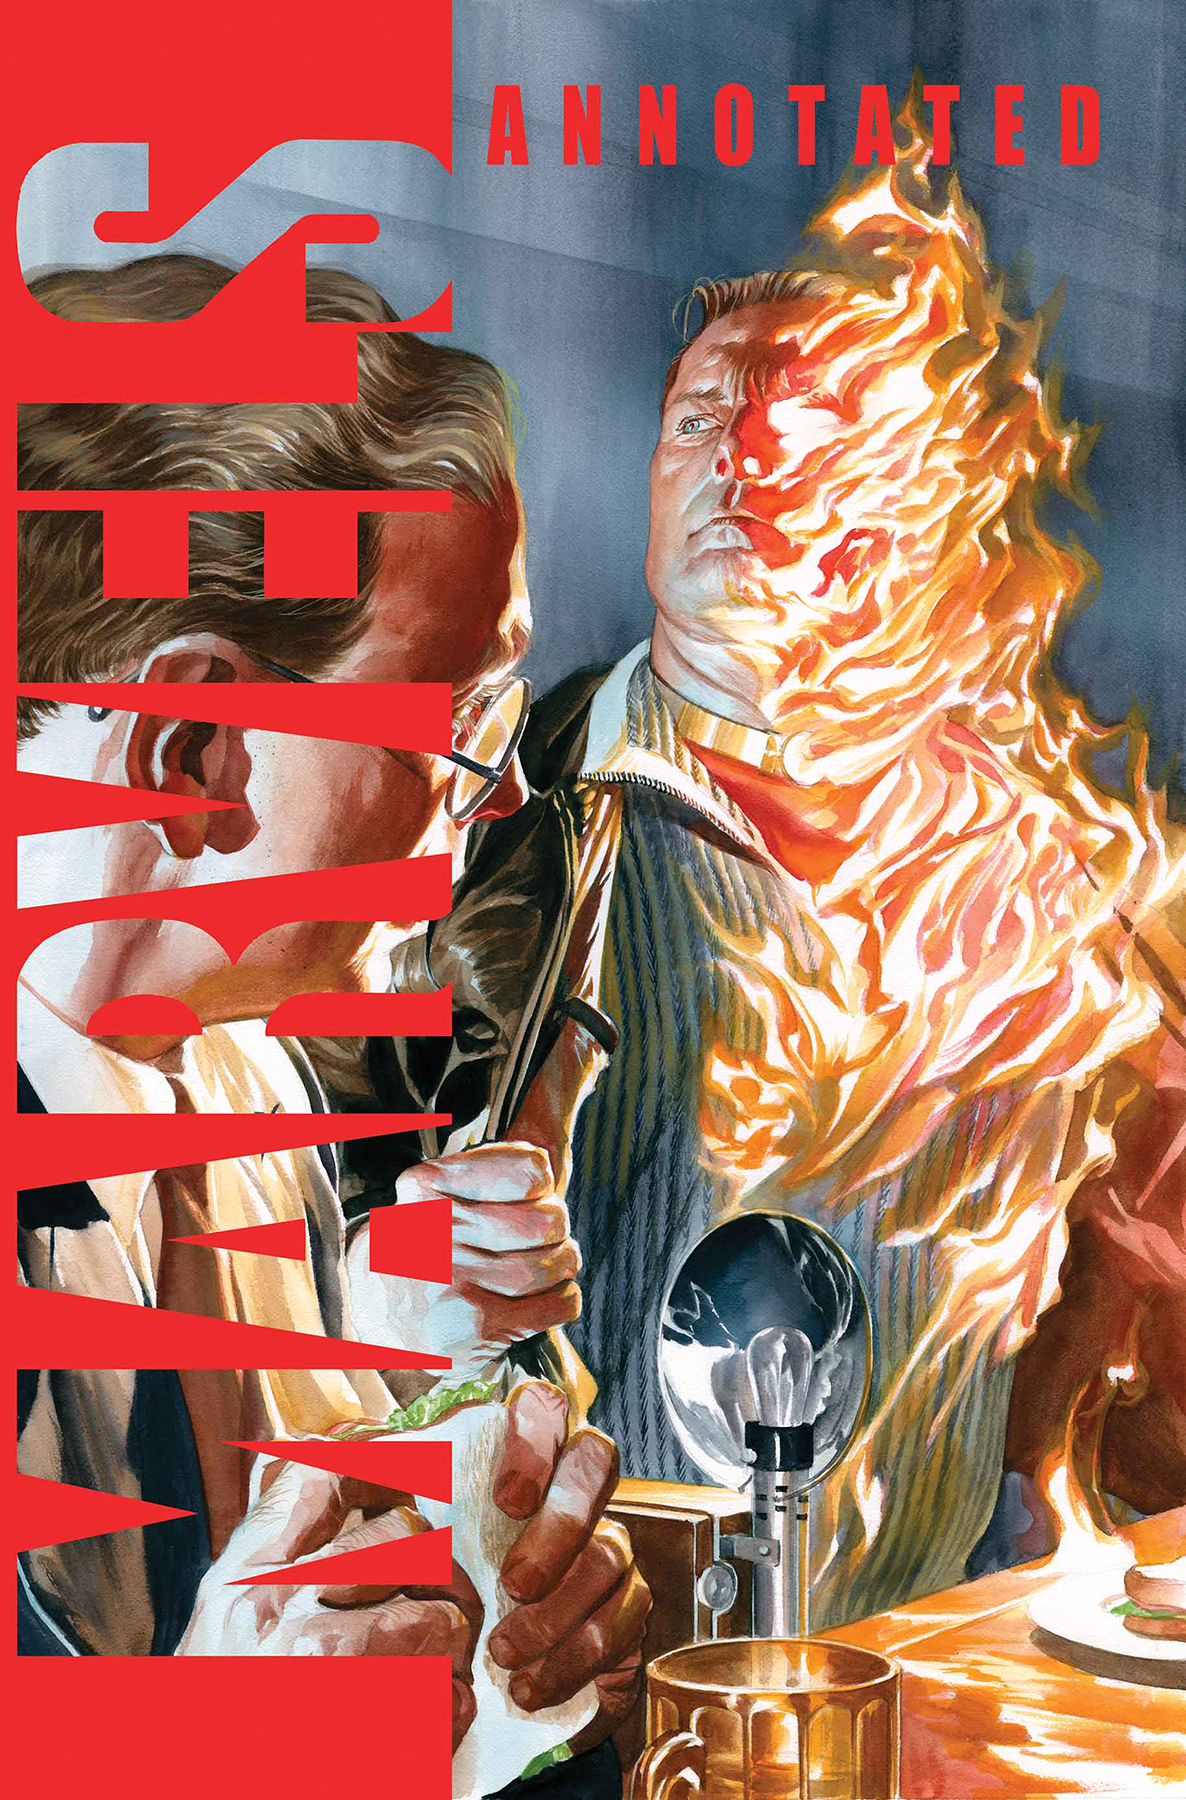 Marvels Annotated no. 1 (1 of 4) (2019 Series)